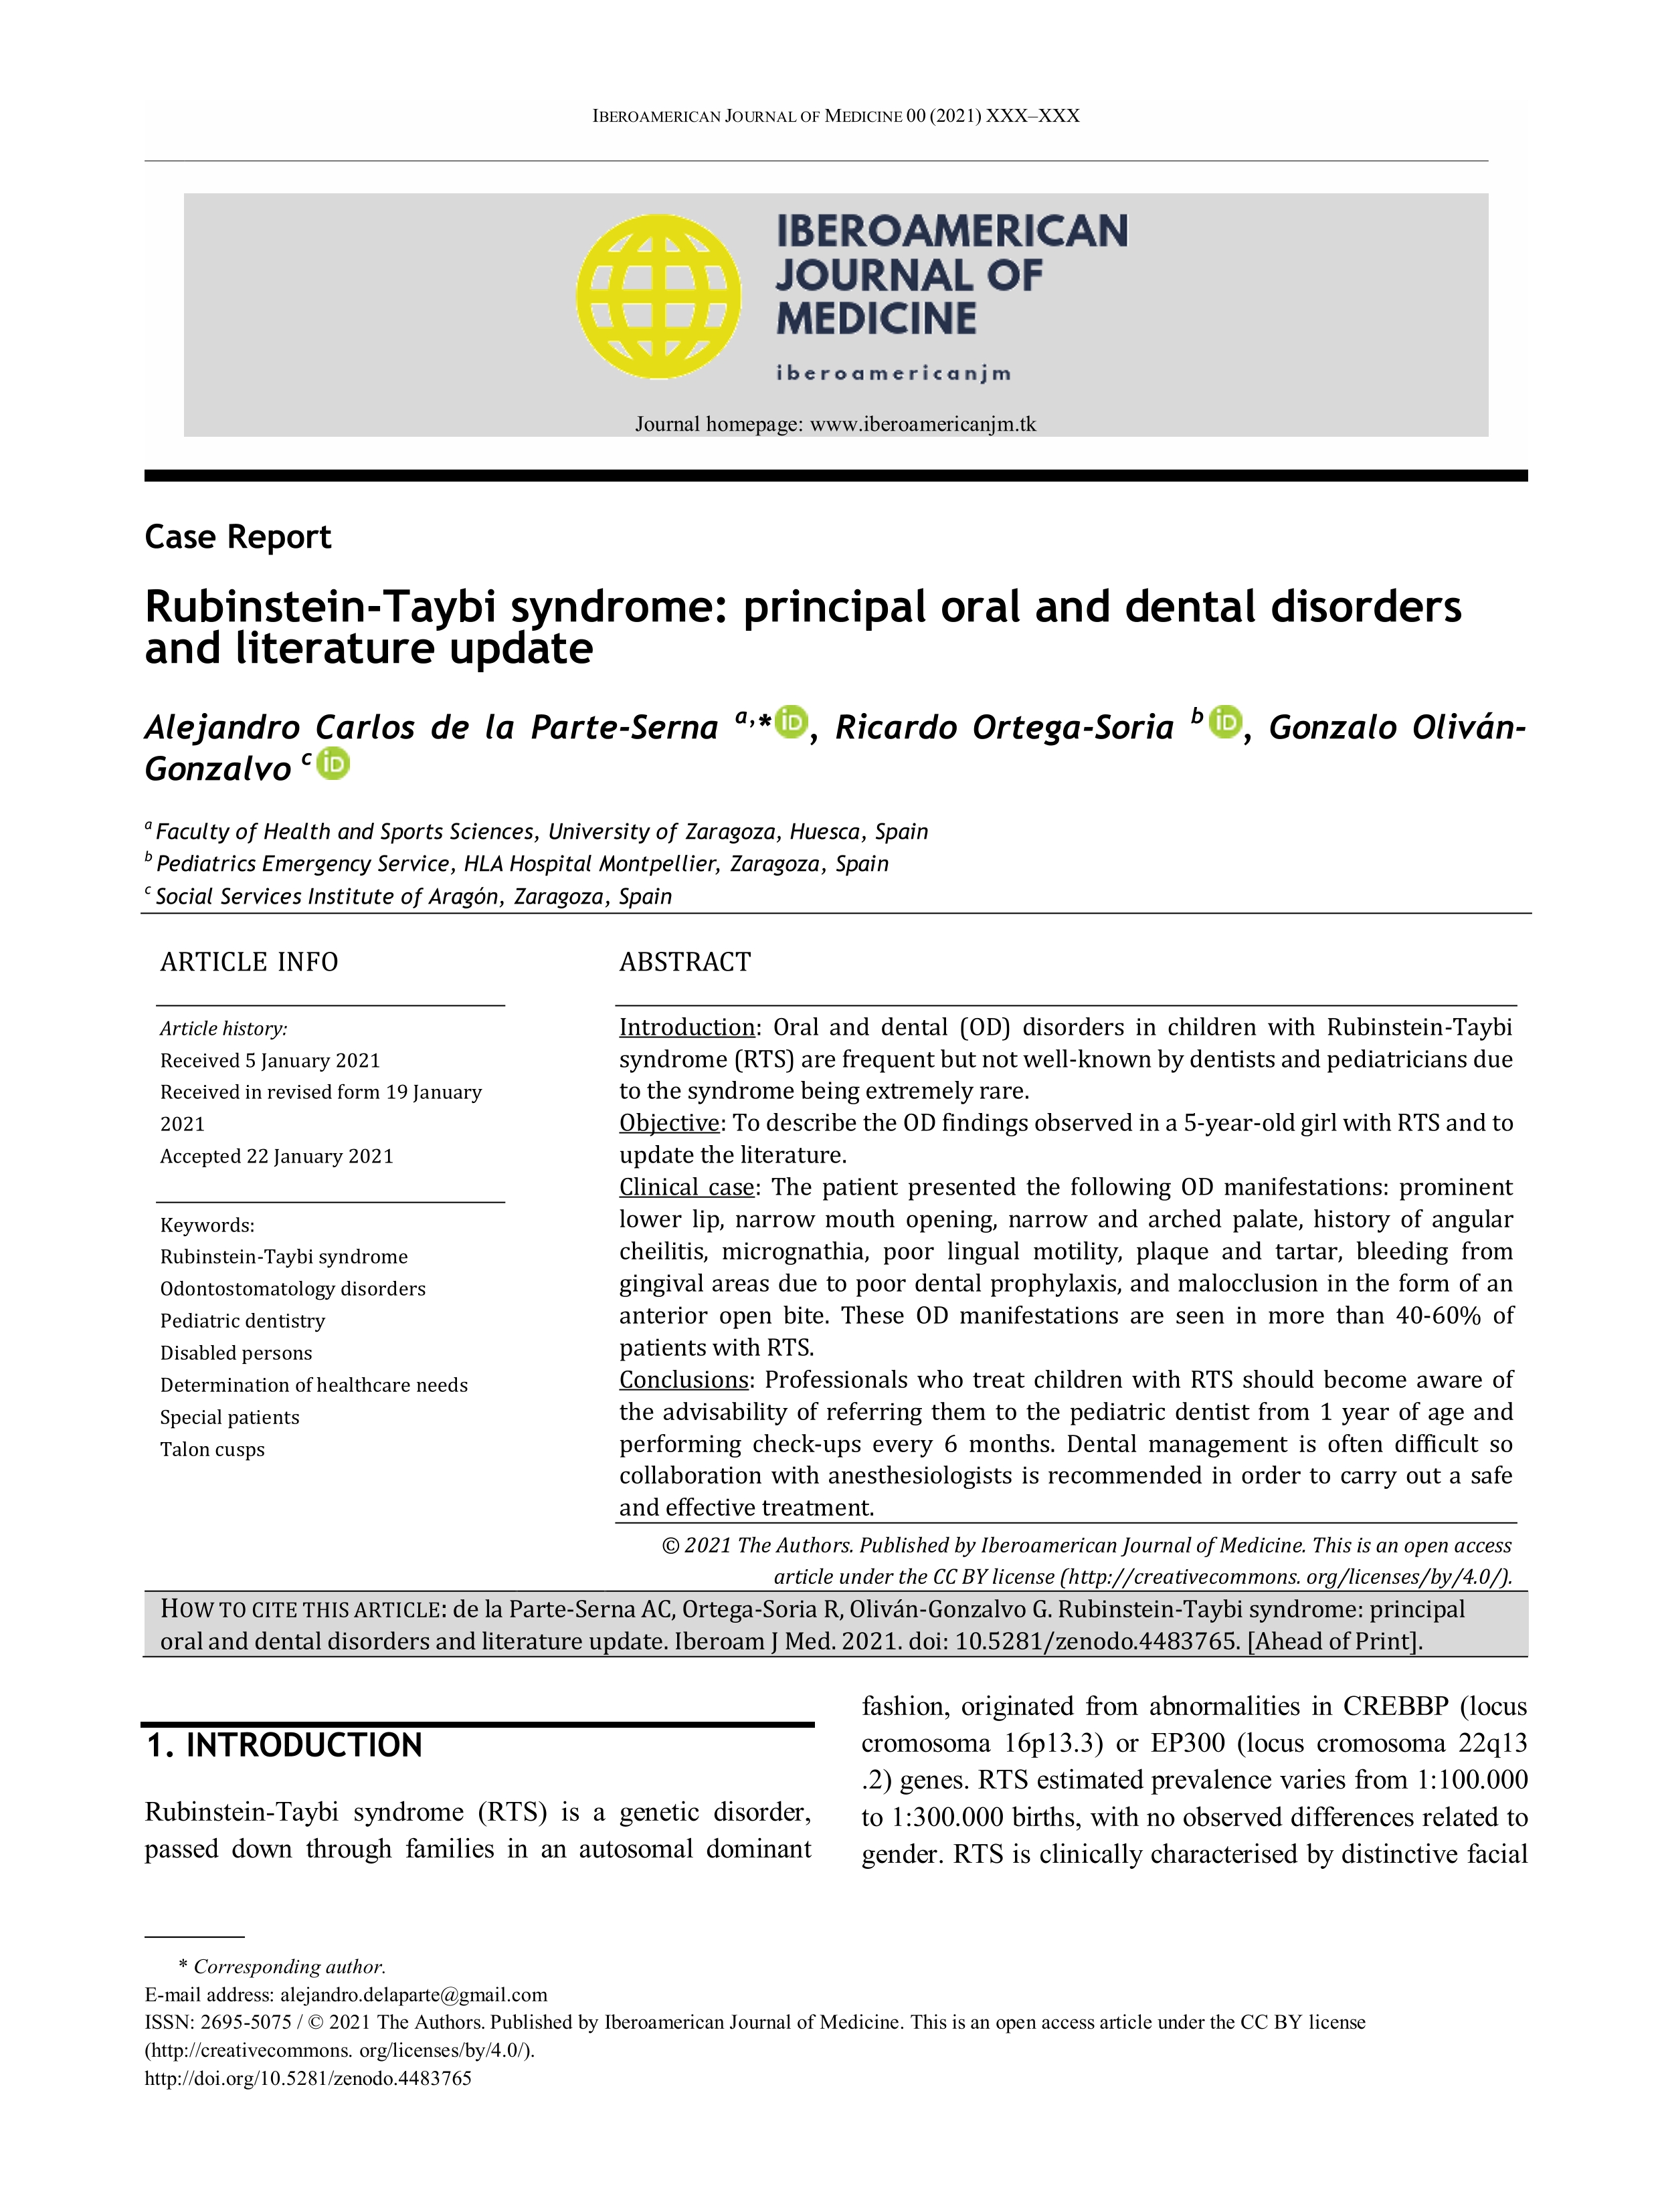 Rubinstein-Taybi syndrome: principal oral and dental disorders and literature update